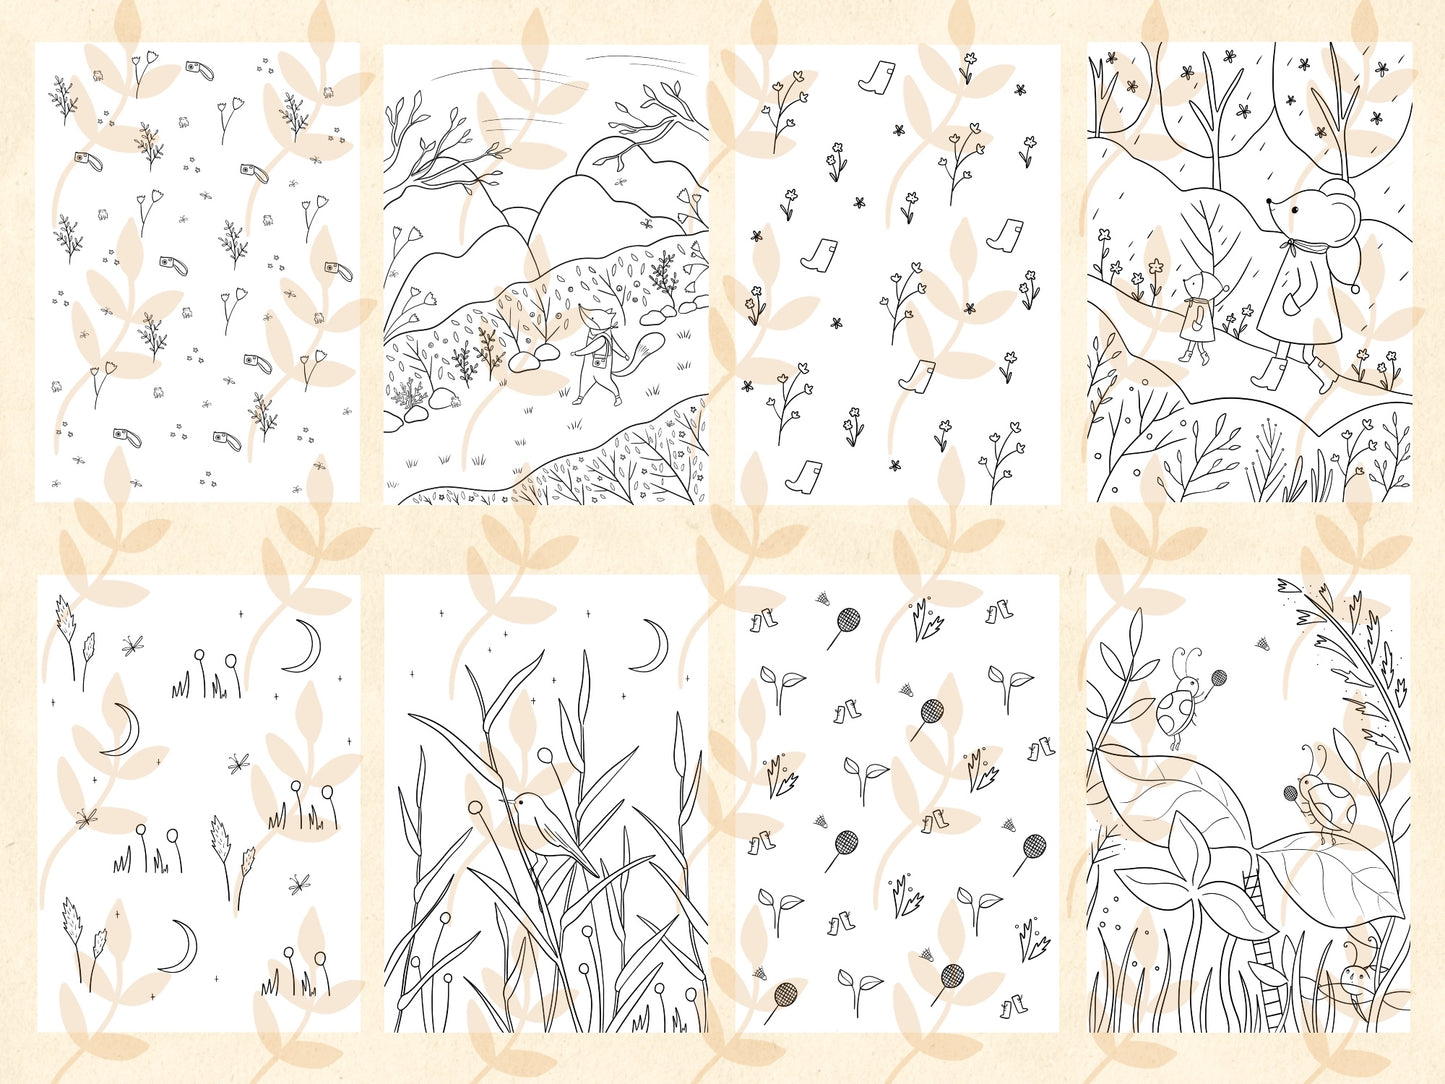 From Spring to Winter 32-page coloring book